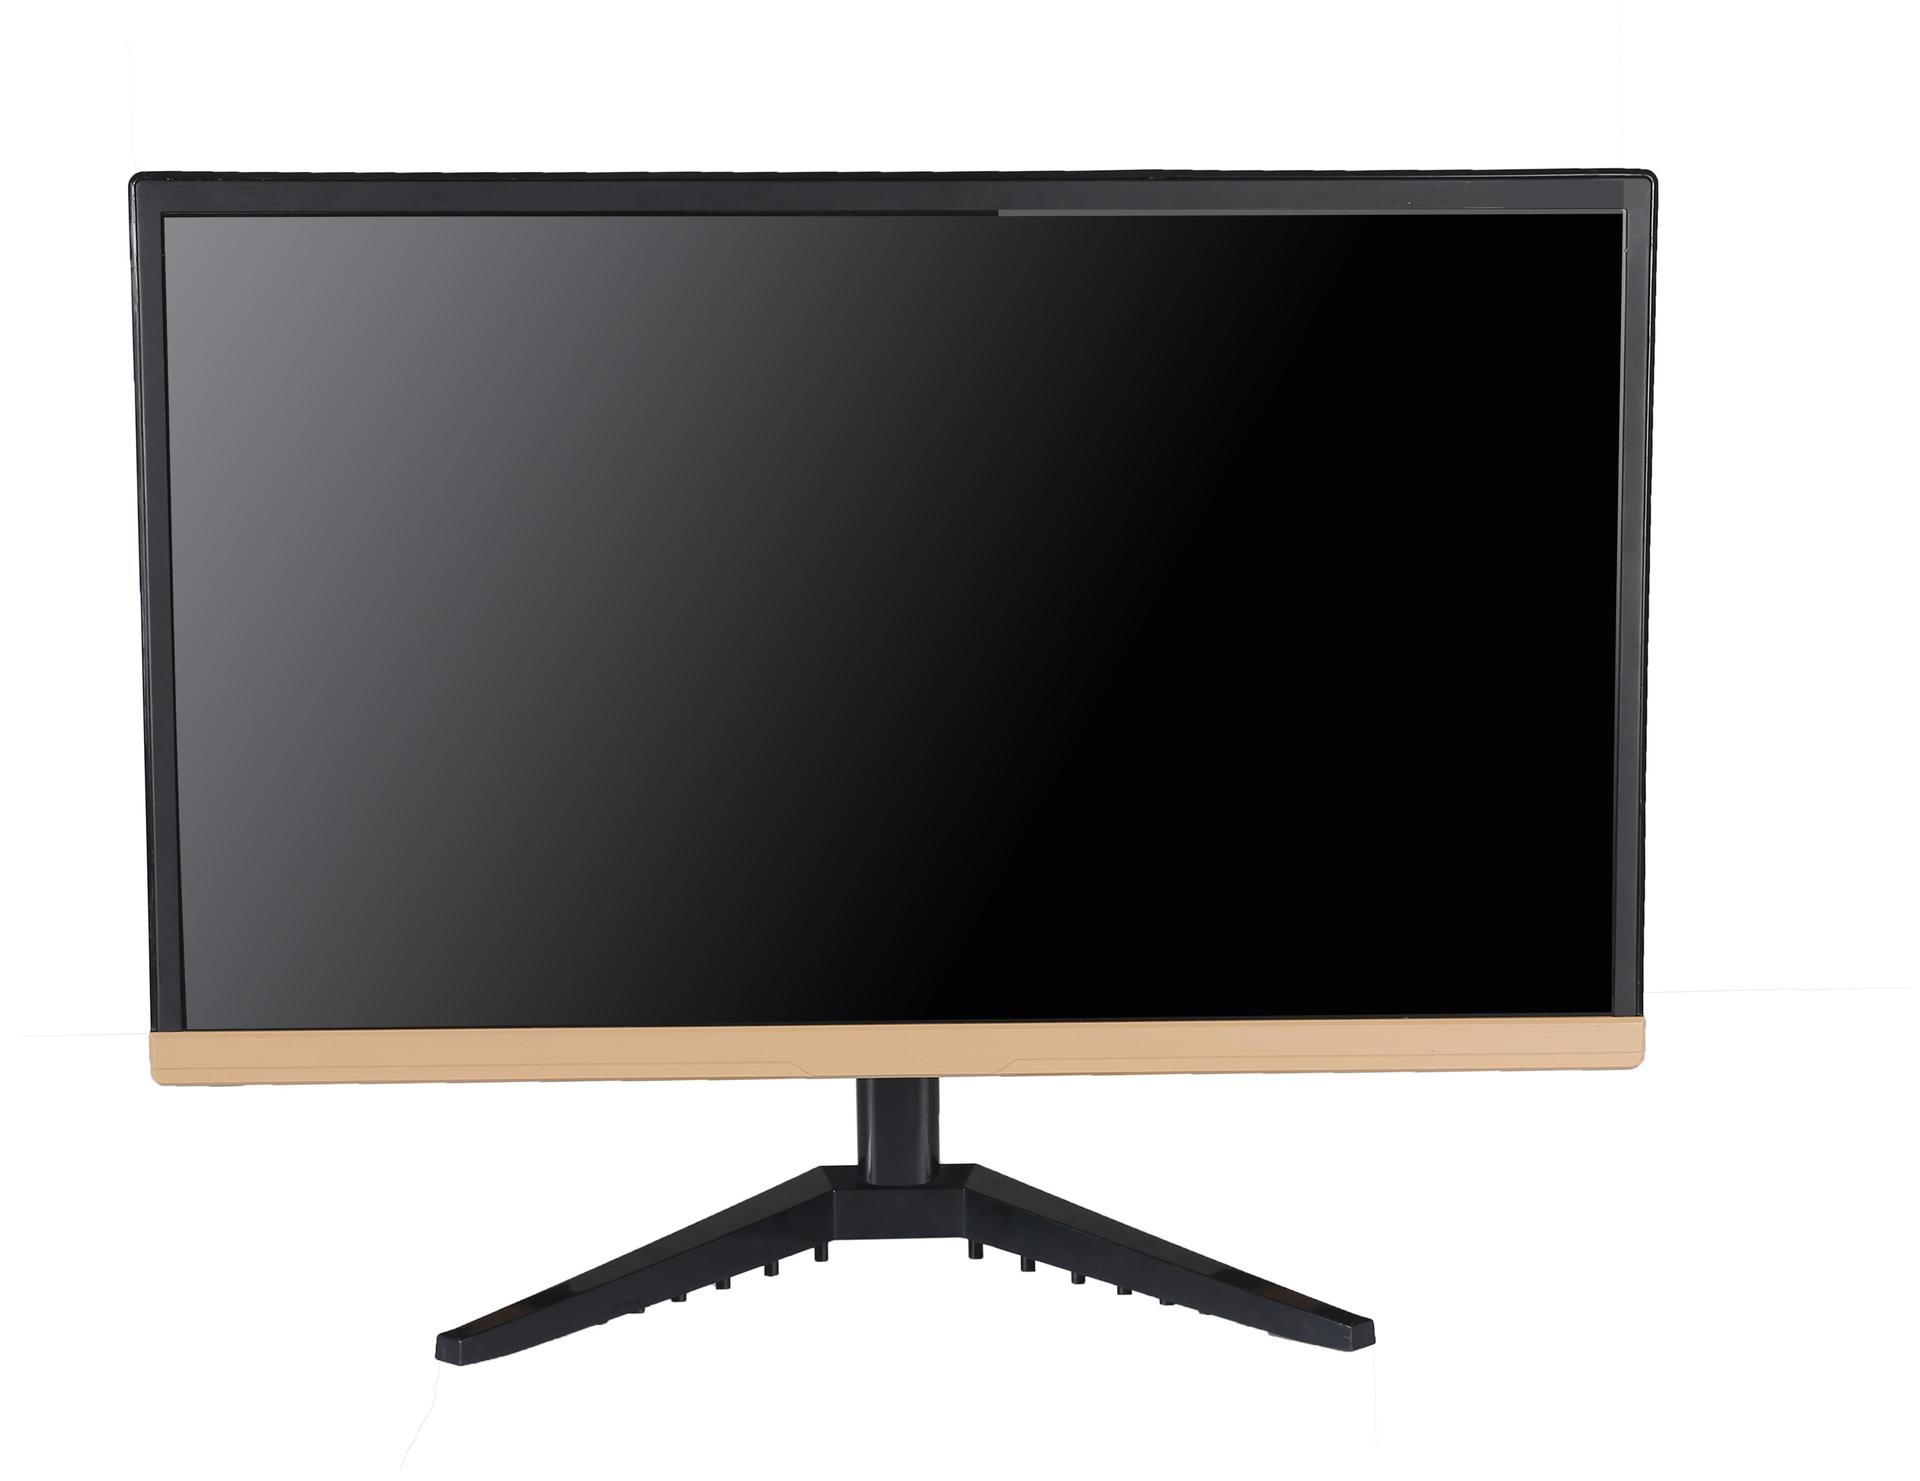 Xinyao LCD slim boarder 21.5 inch led monitor modern design for tv screen